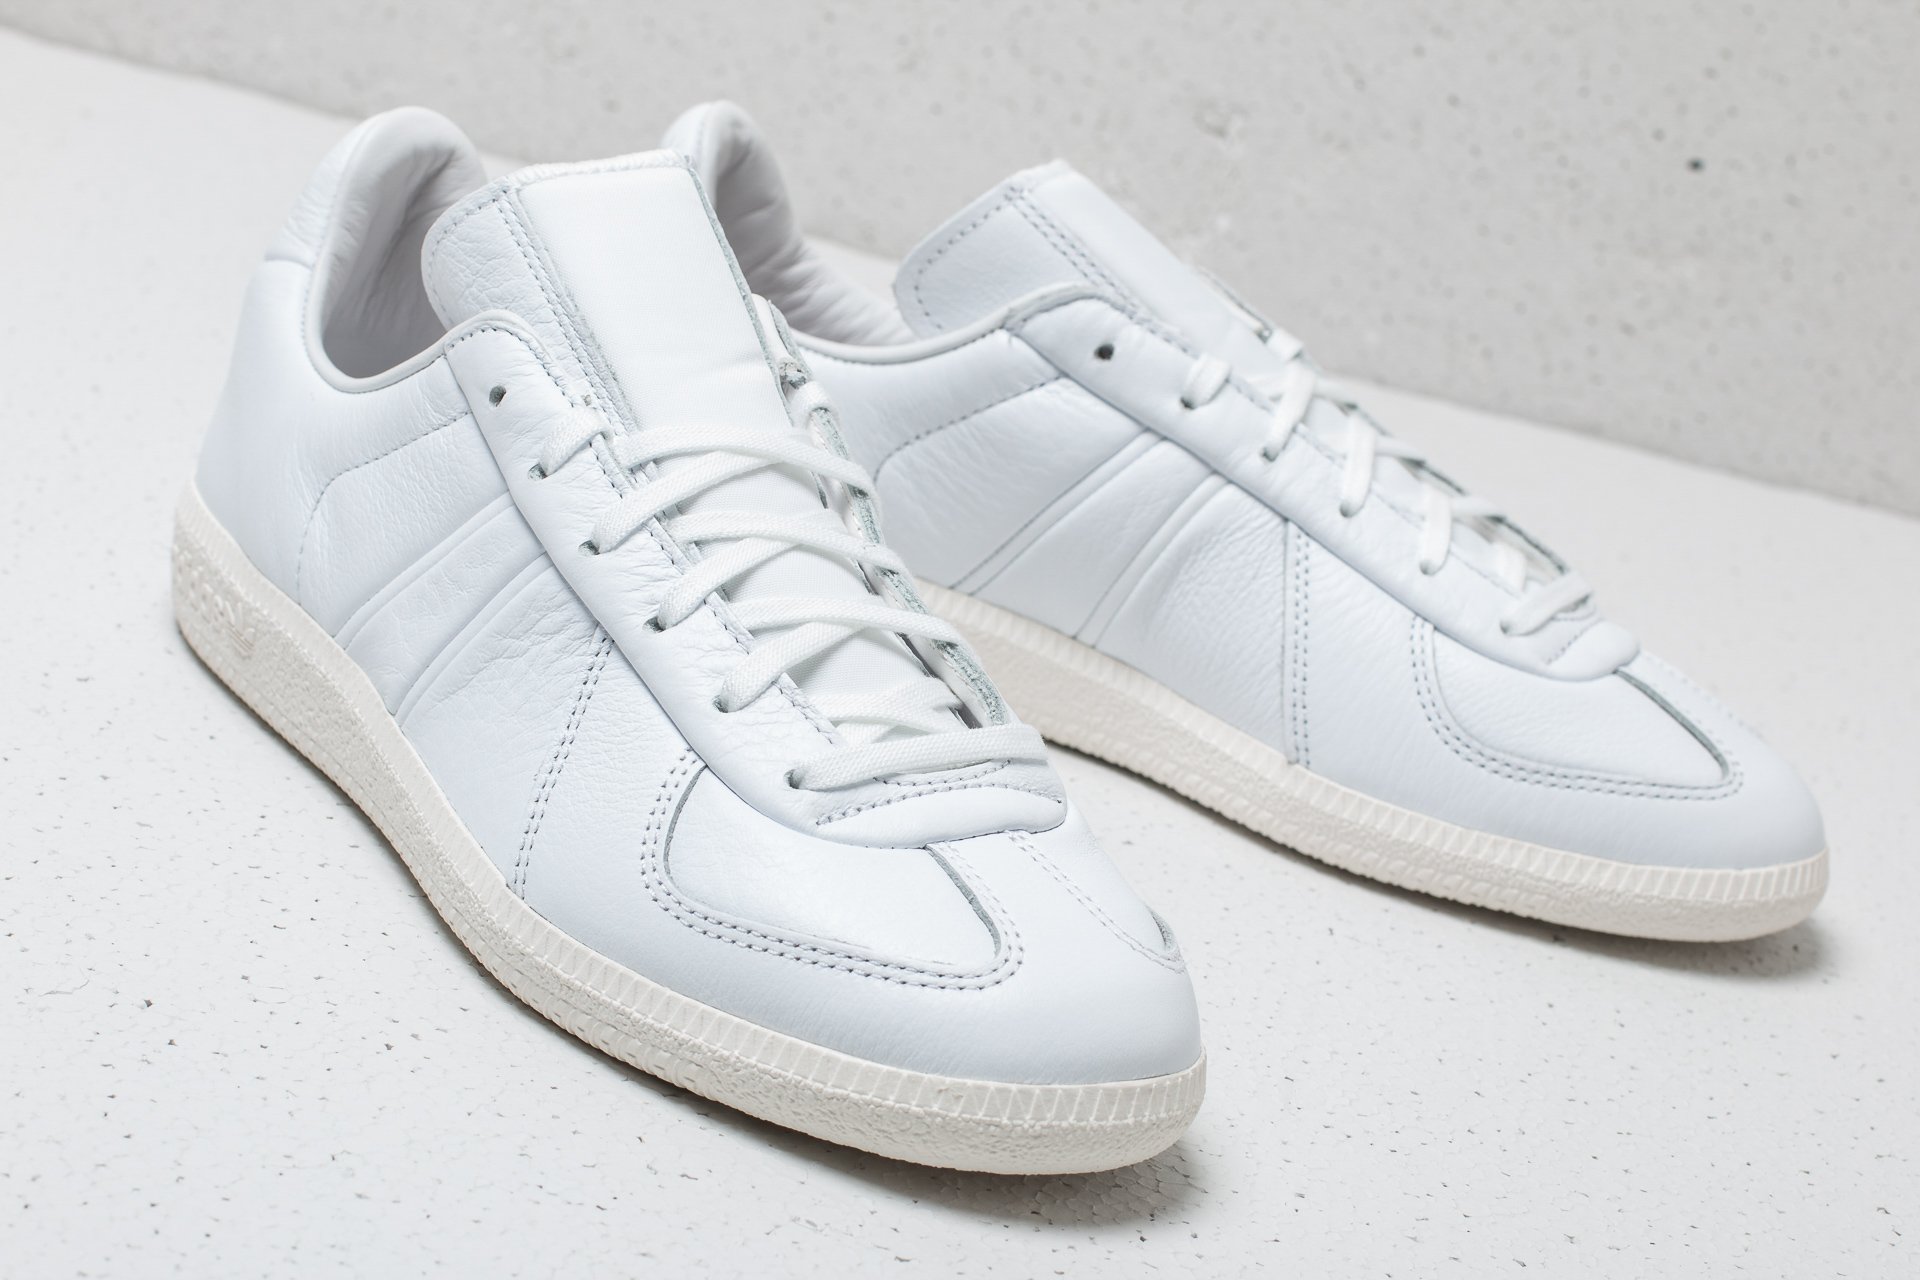 adidas x Oyster Holdings BW Army